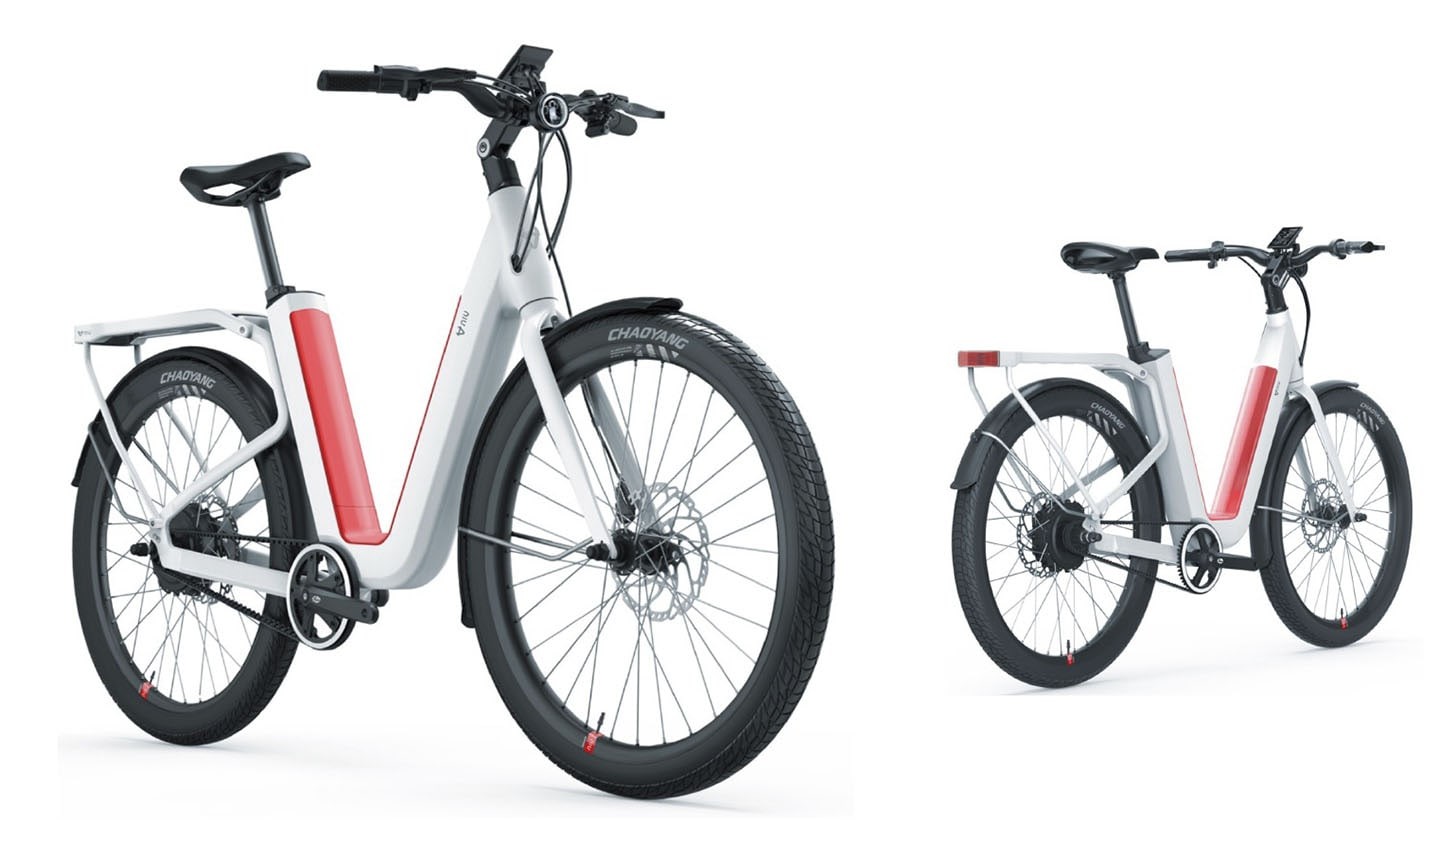 The NIU BQI looks like a perfect ebike for someone that wants to rely less on their car, but still be able to get around quickly and easily.